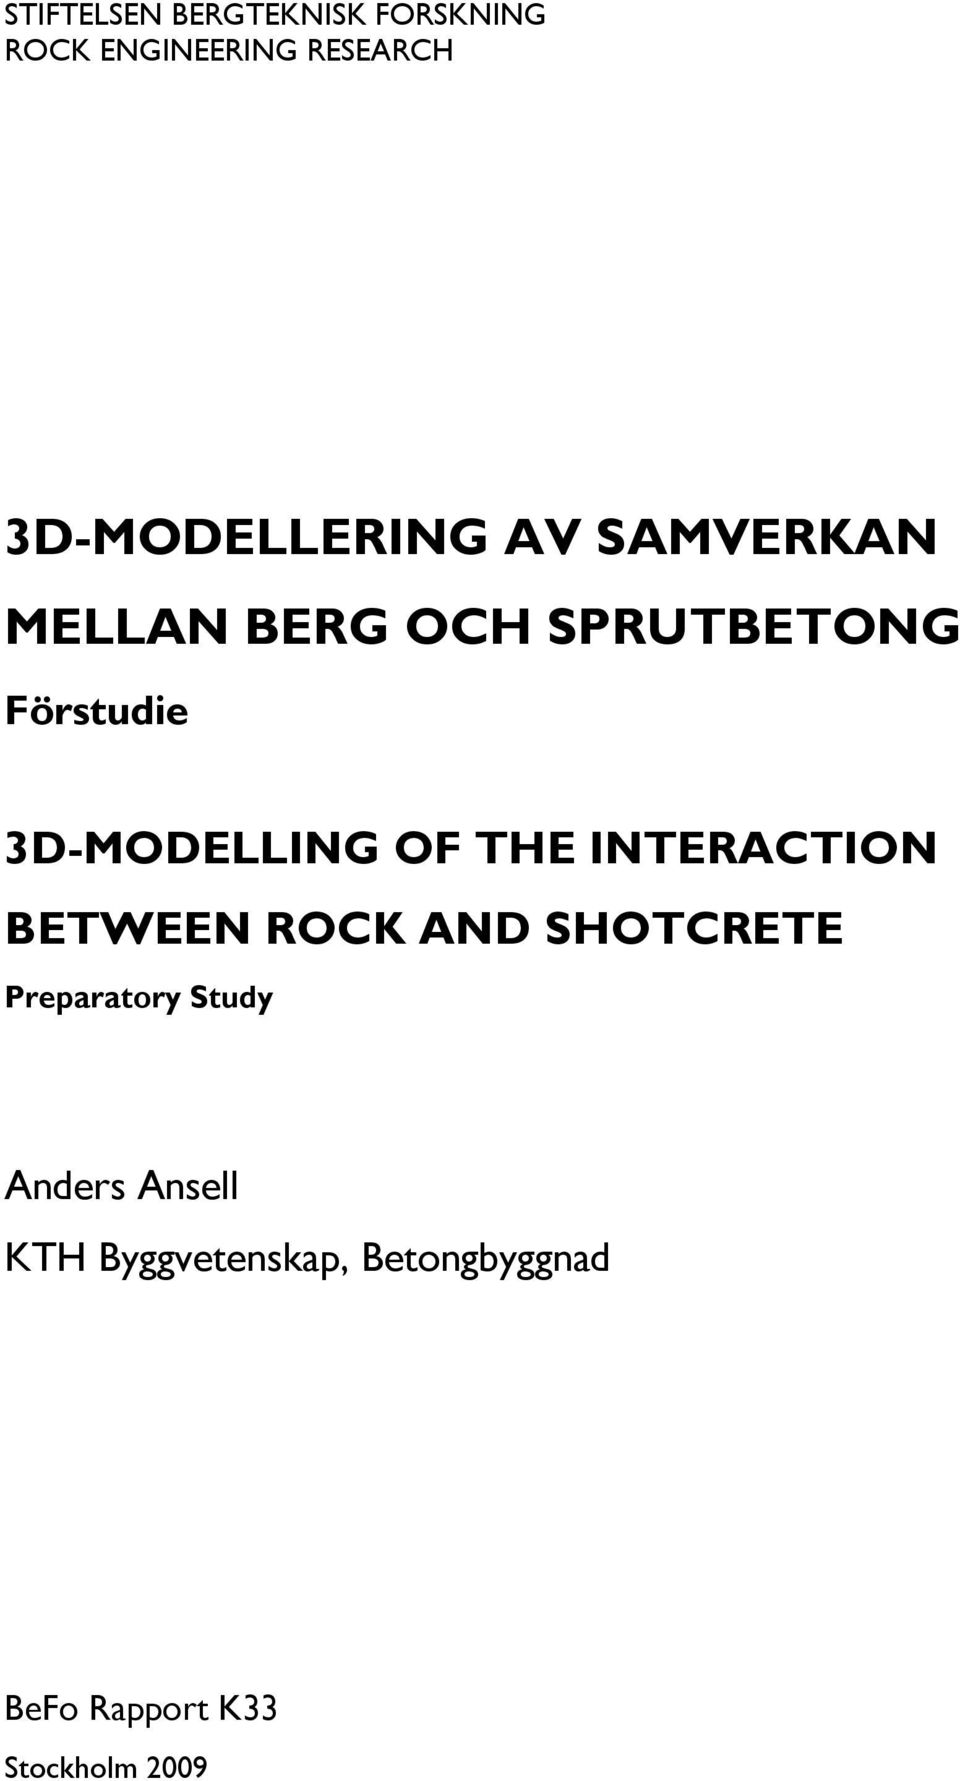 3D-MODELLING OF THE INTERACTION BETWEEN ROCK AND SHOTCRETE